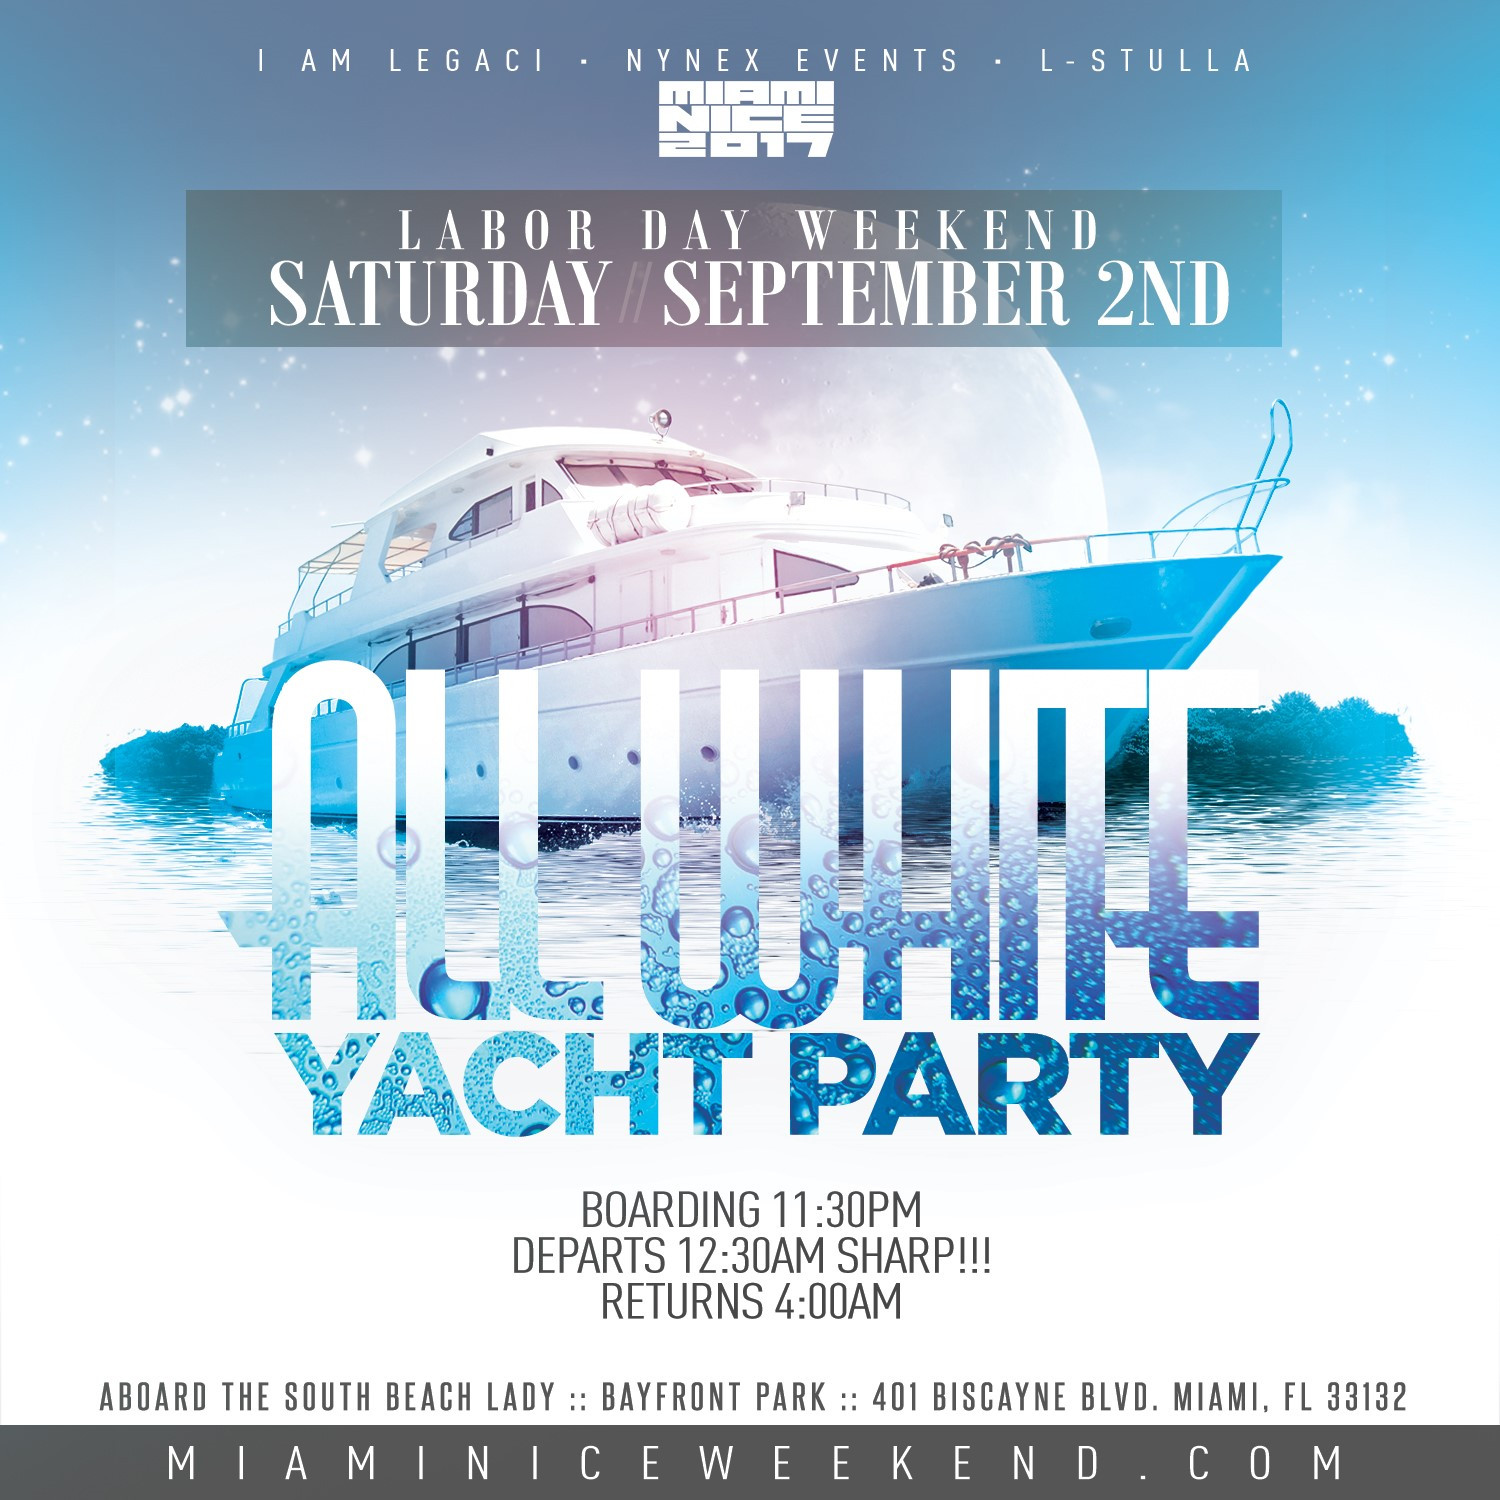 Labor Day Weekend Party
 MIAMI NICE 2017 ANNUAL LABOR DAY WEEKEND ALL WHITE YACHT